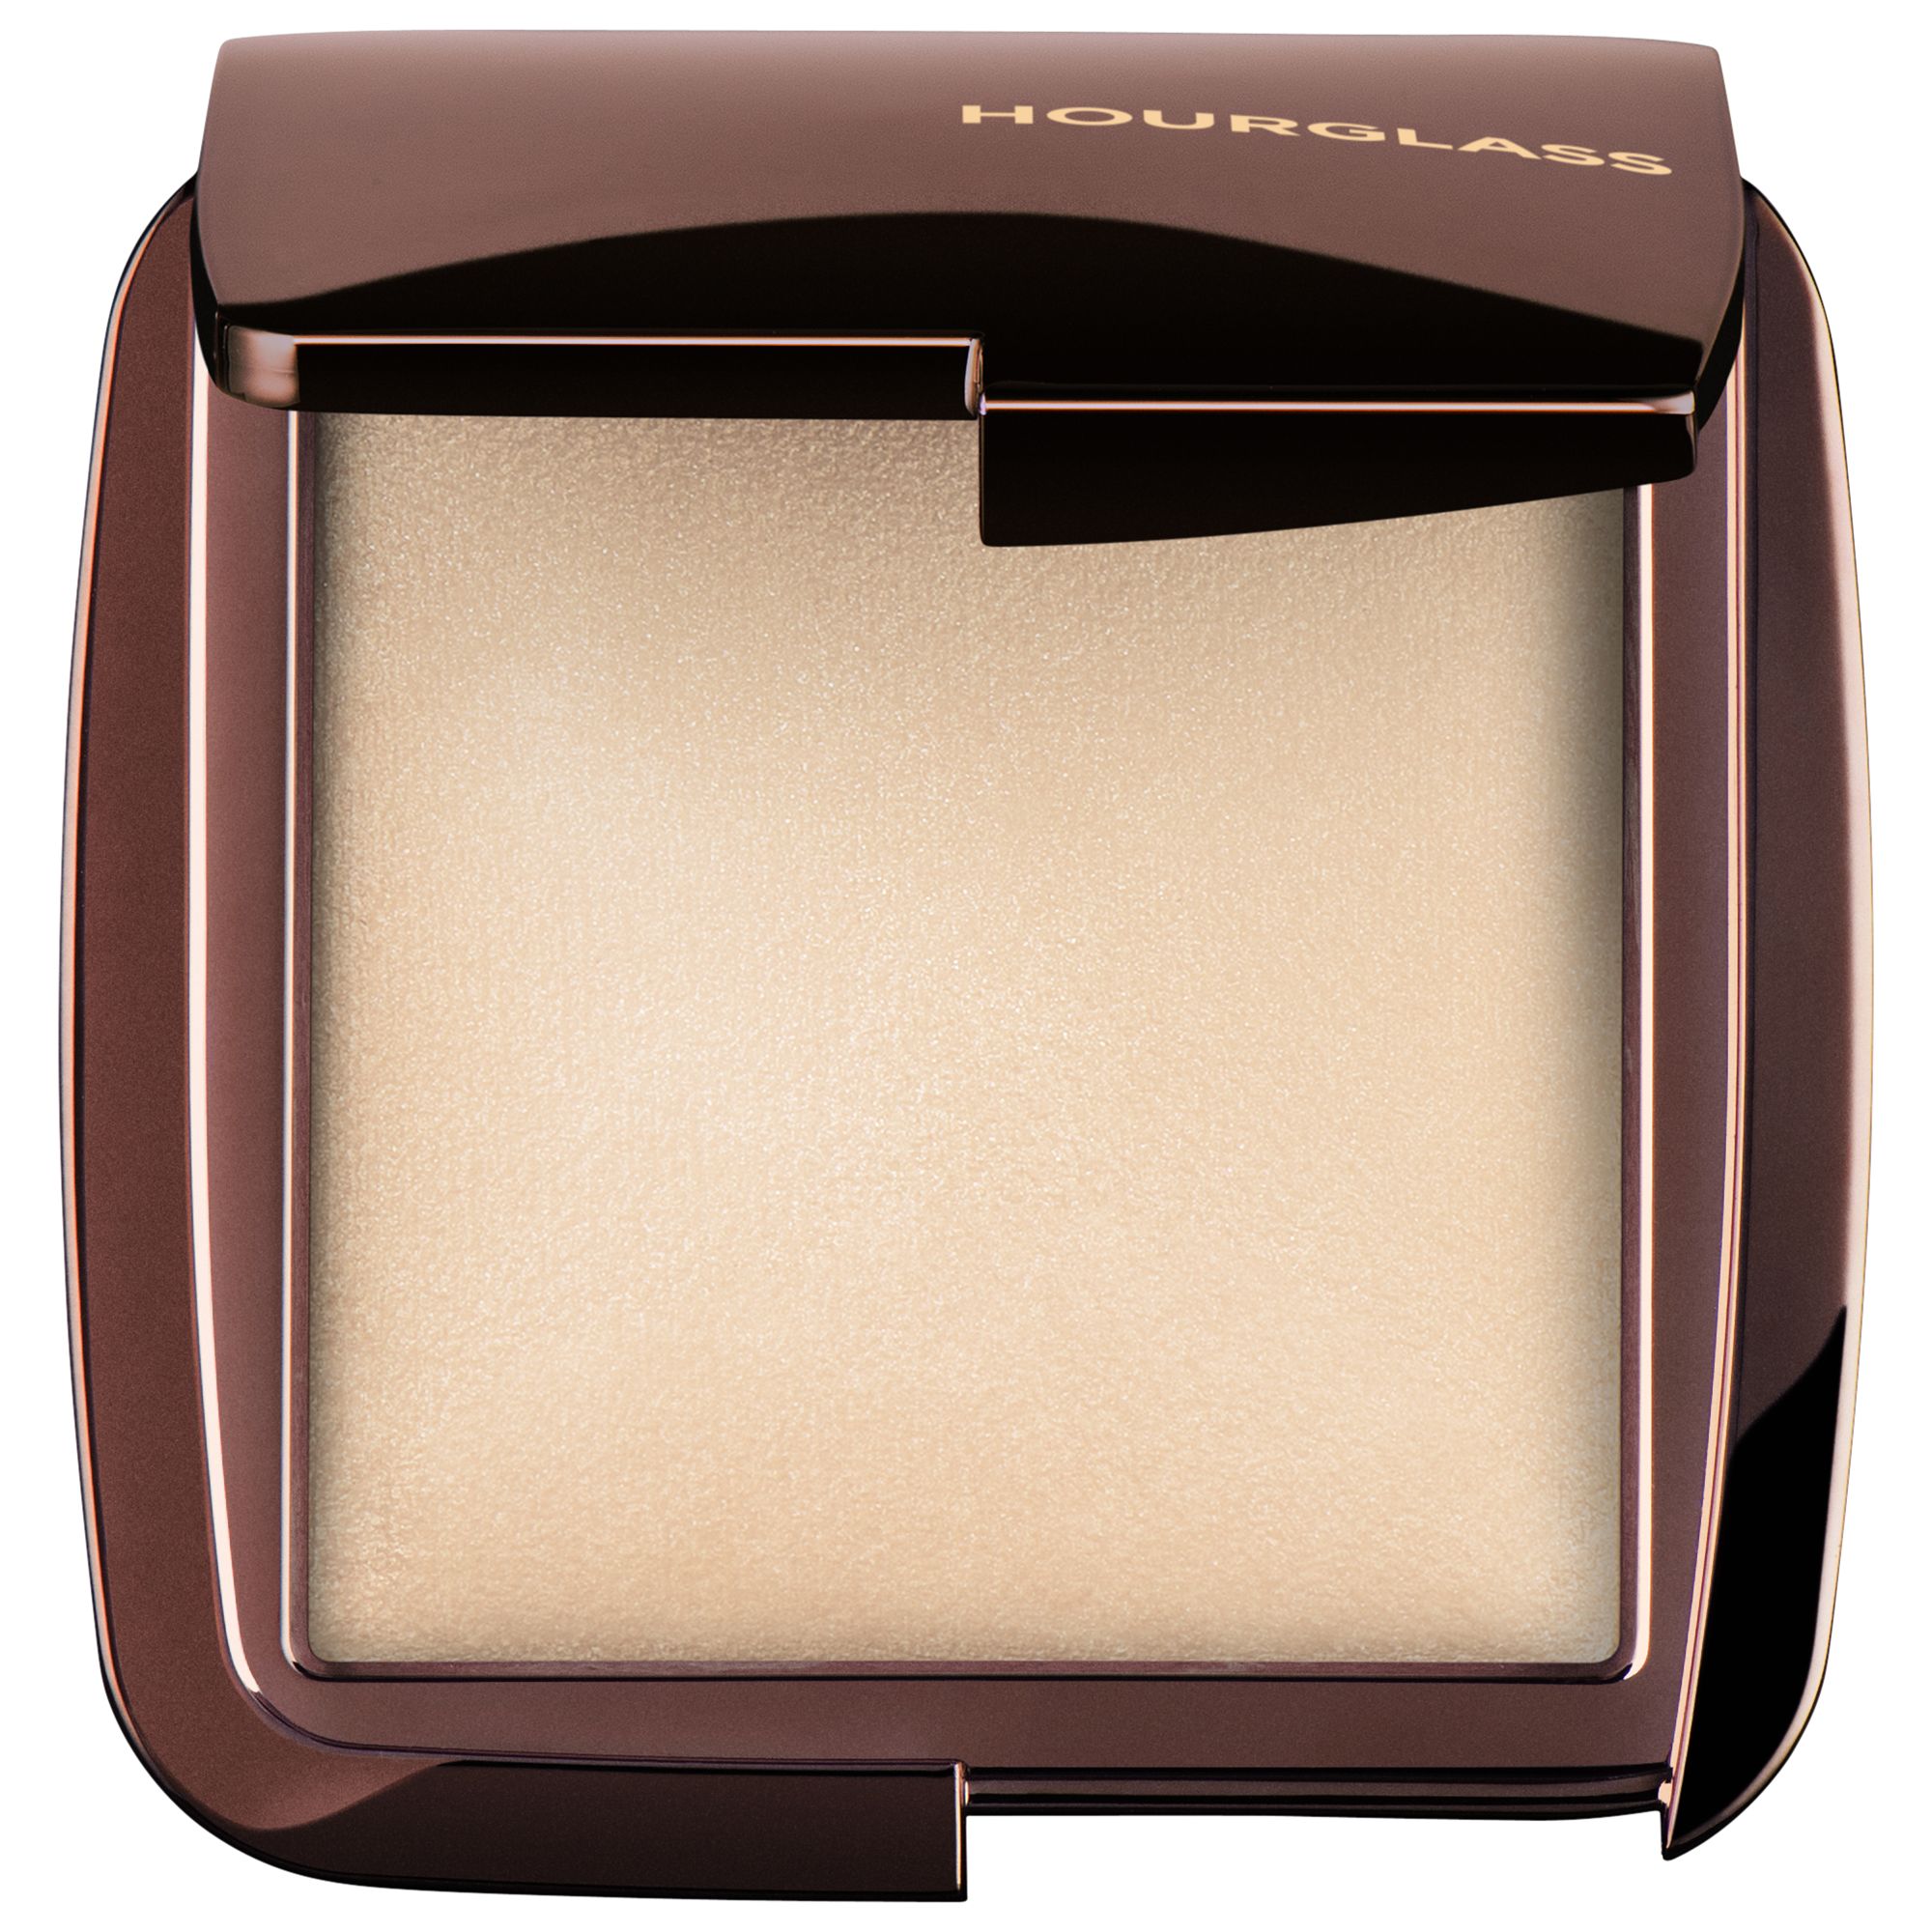 Hourglass Ambient Light Powder, Diffused, Warm Pale Yellow